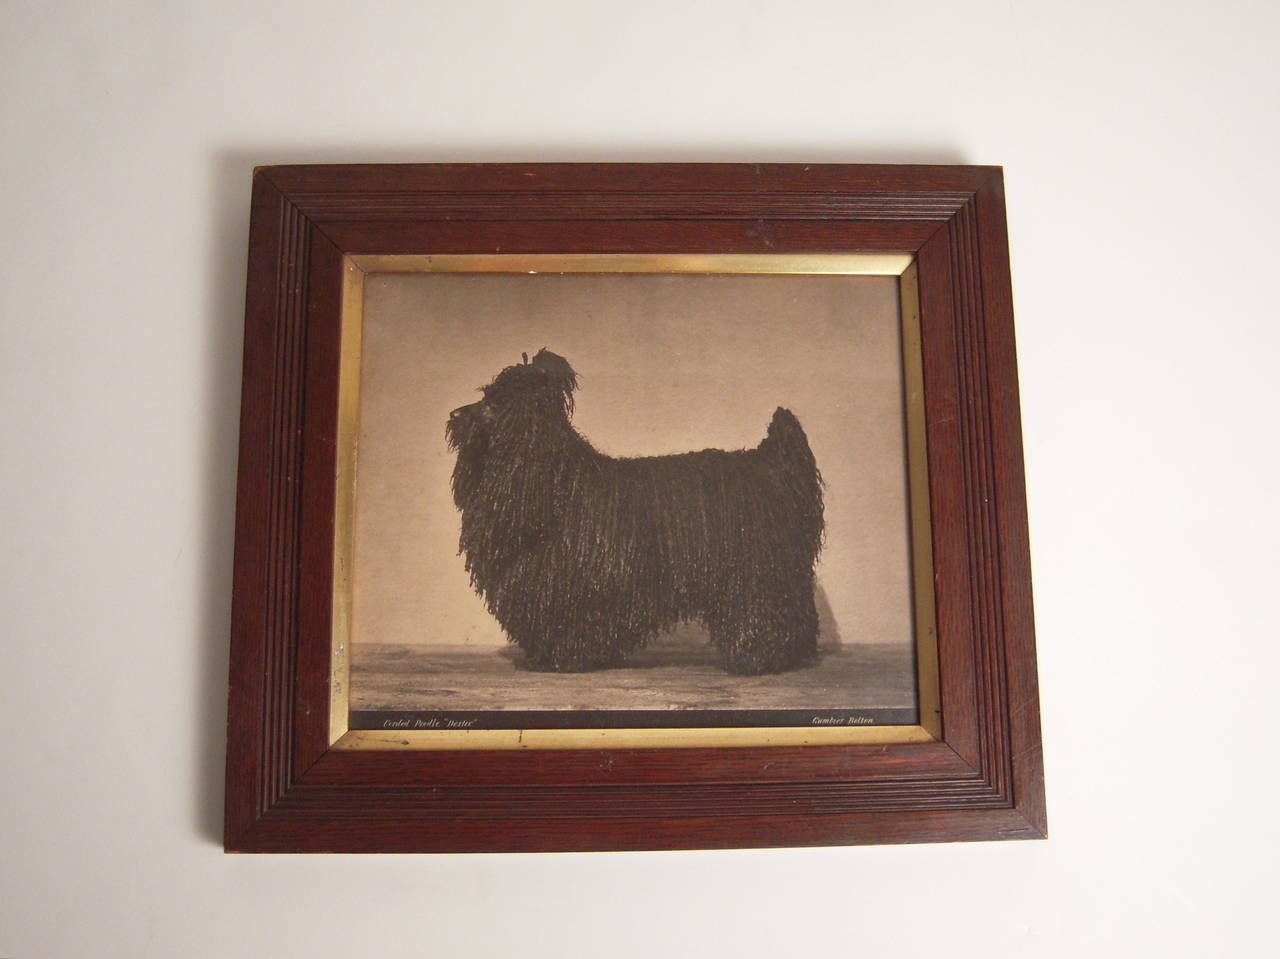 A fine 19th century dog portrait of a prize corded poodle named Dexter, by photographer Gambier Bolton, in its original carved wood frame. Below the photograph, within the frame, is a black band, with calligraphy hand-painted in white: 'Corded